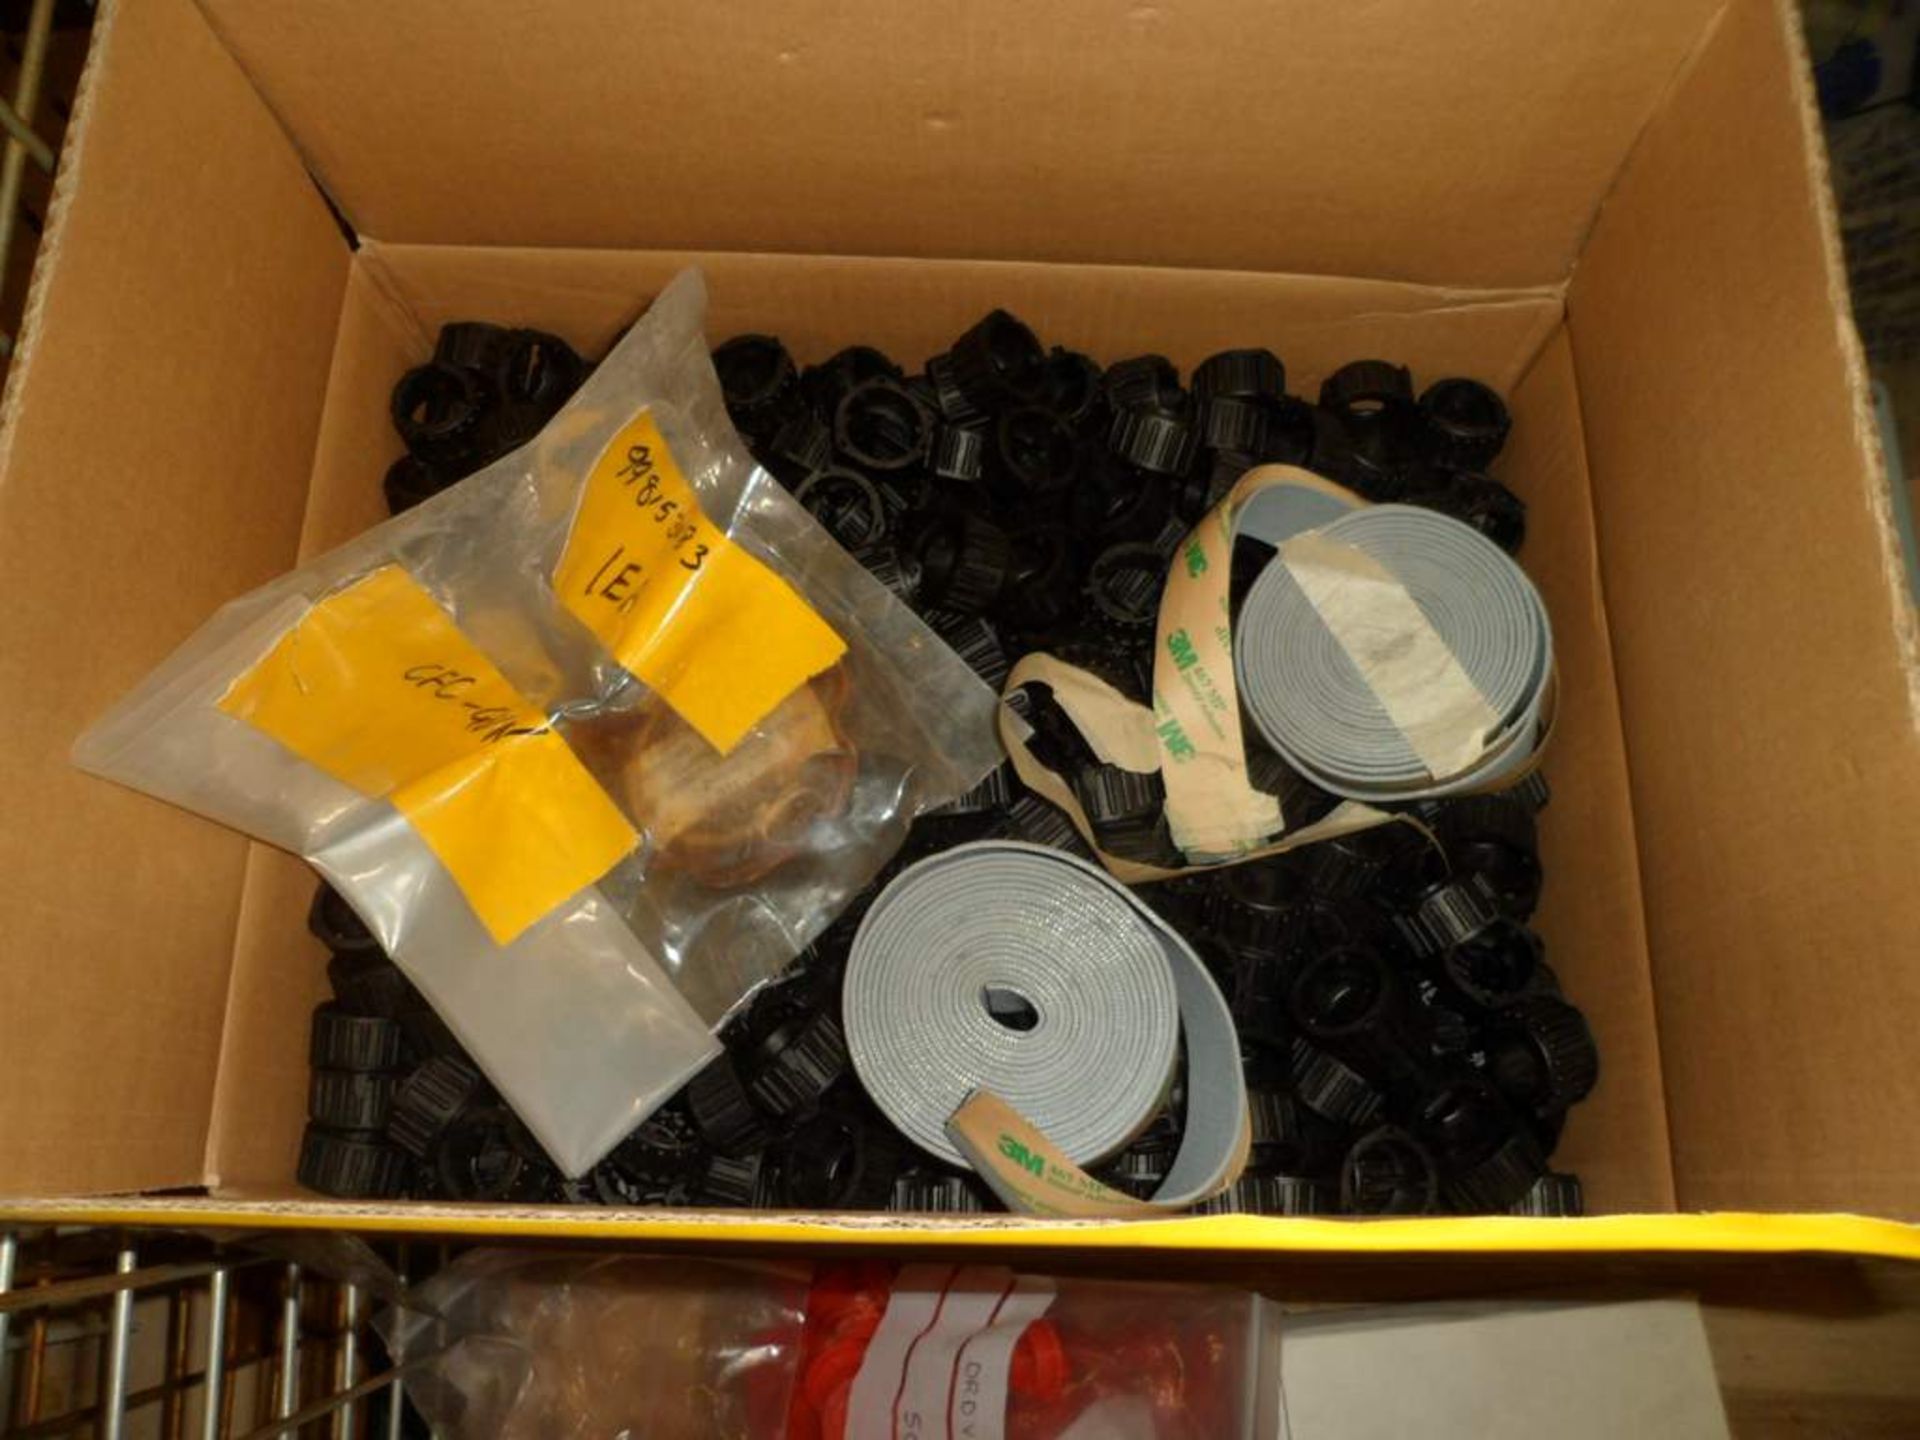 Electrical hardware components - wire, cap ends, 3M tape, laminate - Image 4 of 4